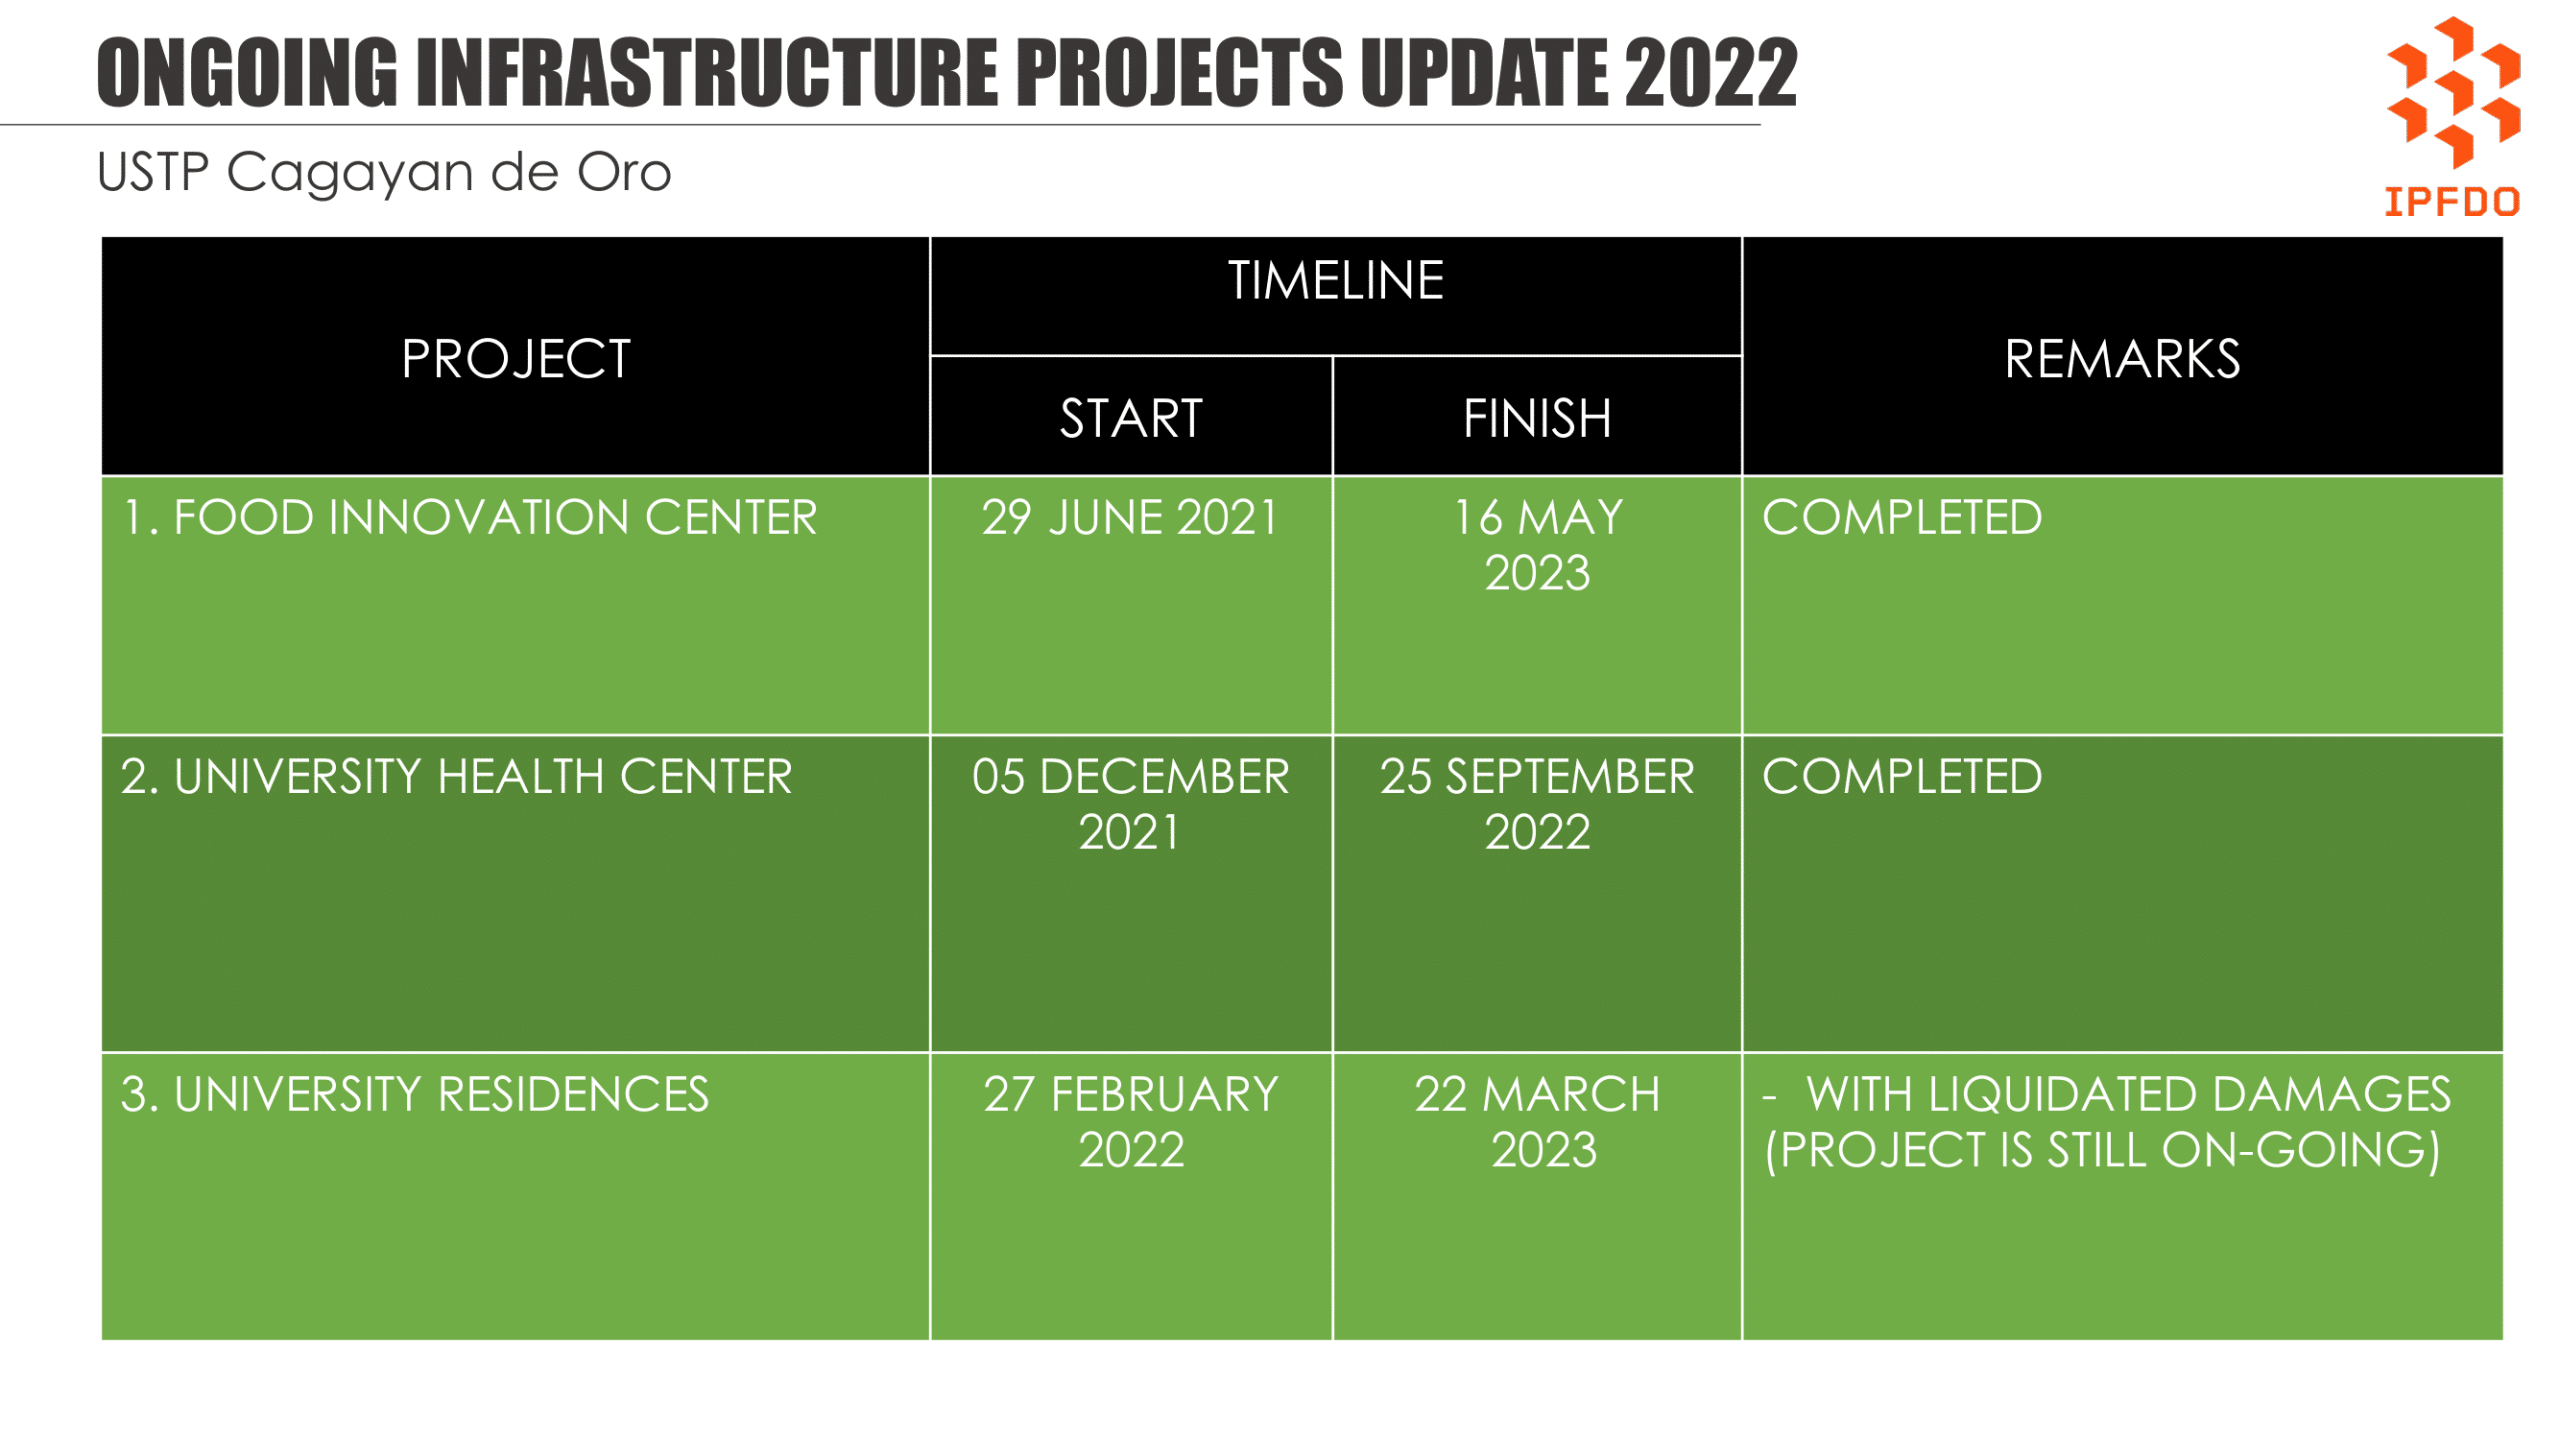 Ongoing Infrastructure Projects Update 2022 - USTP Cagayan de Oro